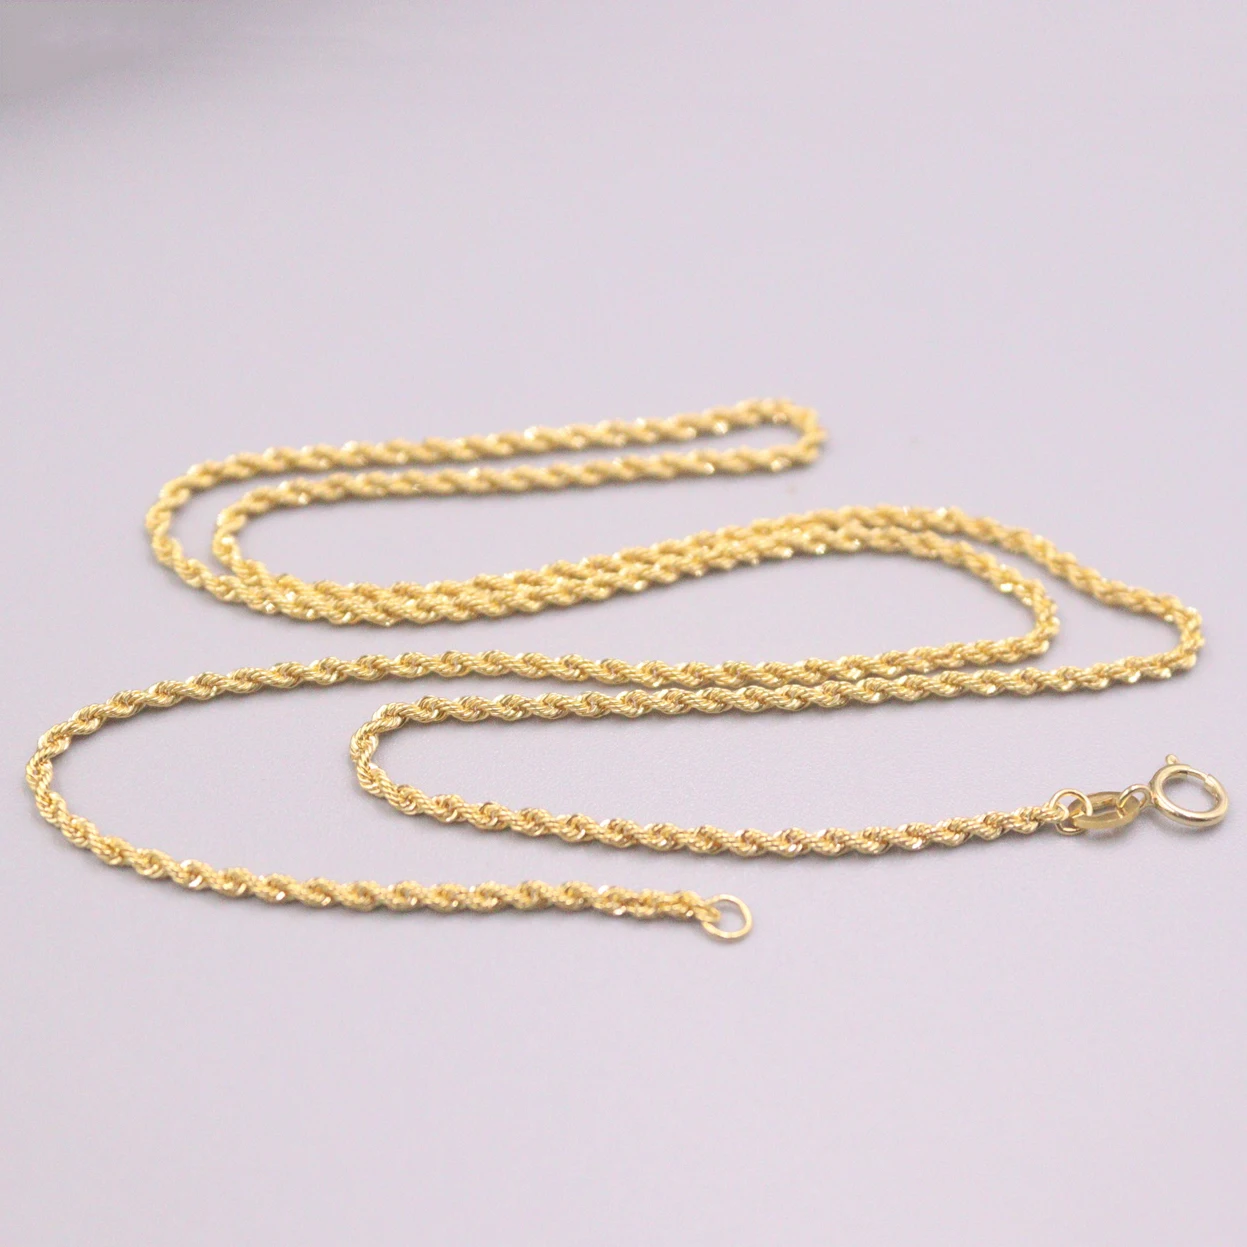 Real 18K Yellow Solid Gold Necklace Unique Wheat Link 1.2mm Lucky Chain 17.7"L